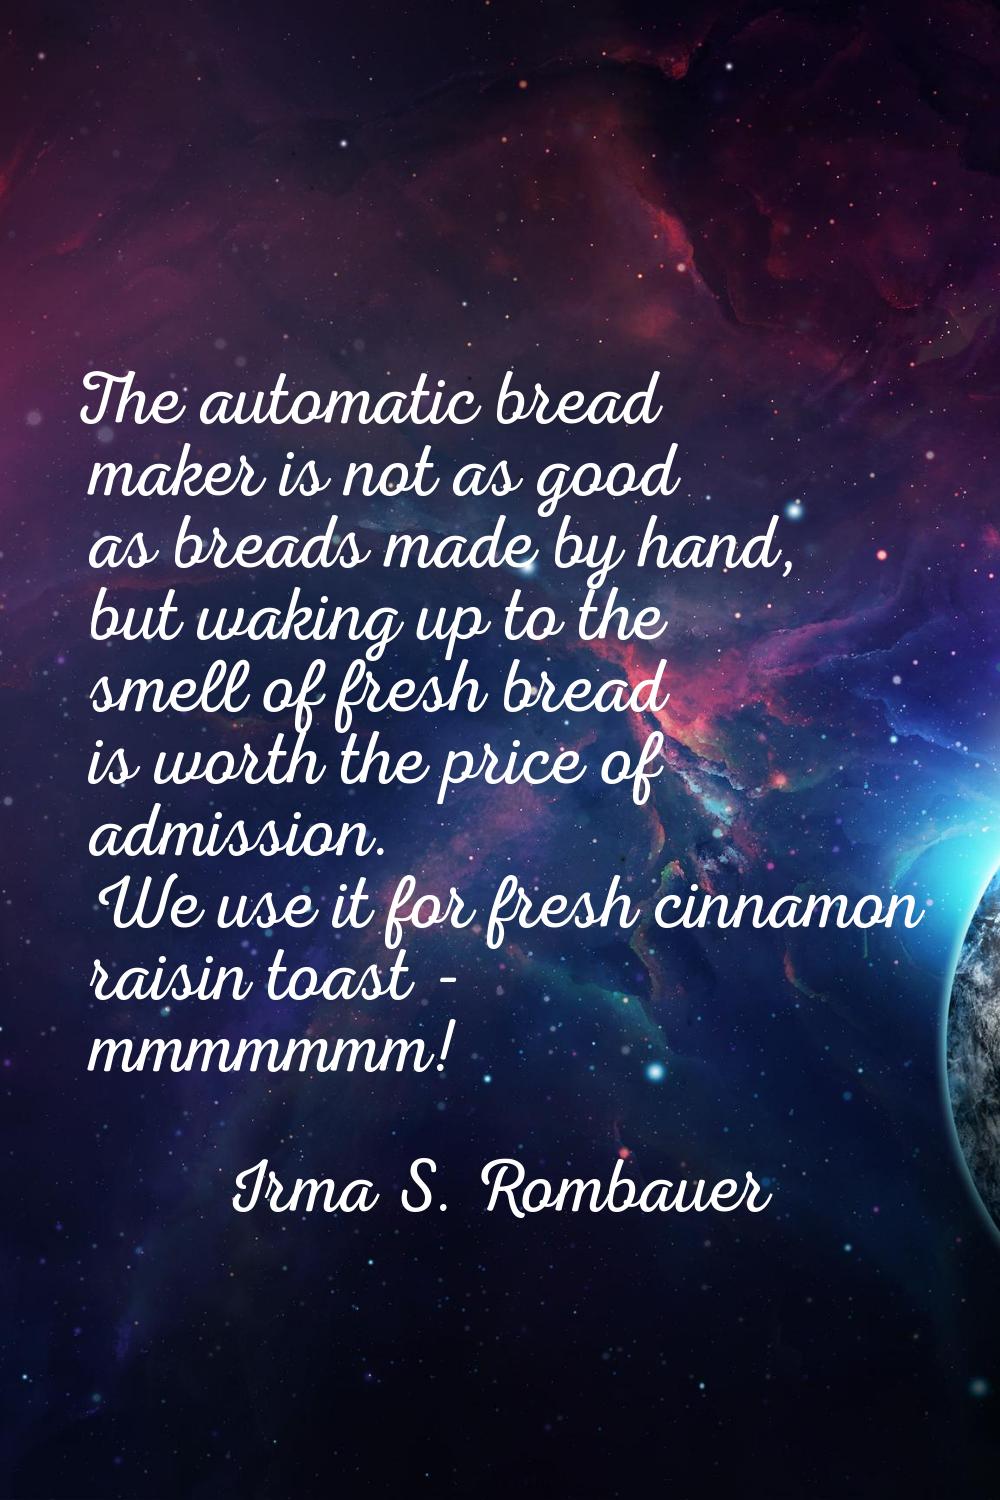 The automatic bread maker is not as good as breads made by hand, but waking up to the smell of fres